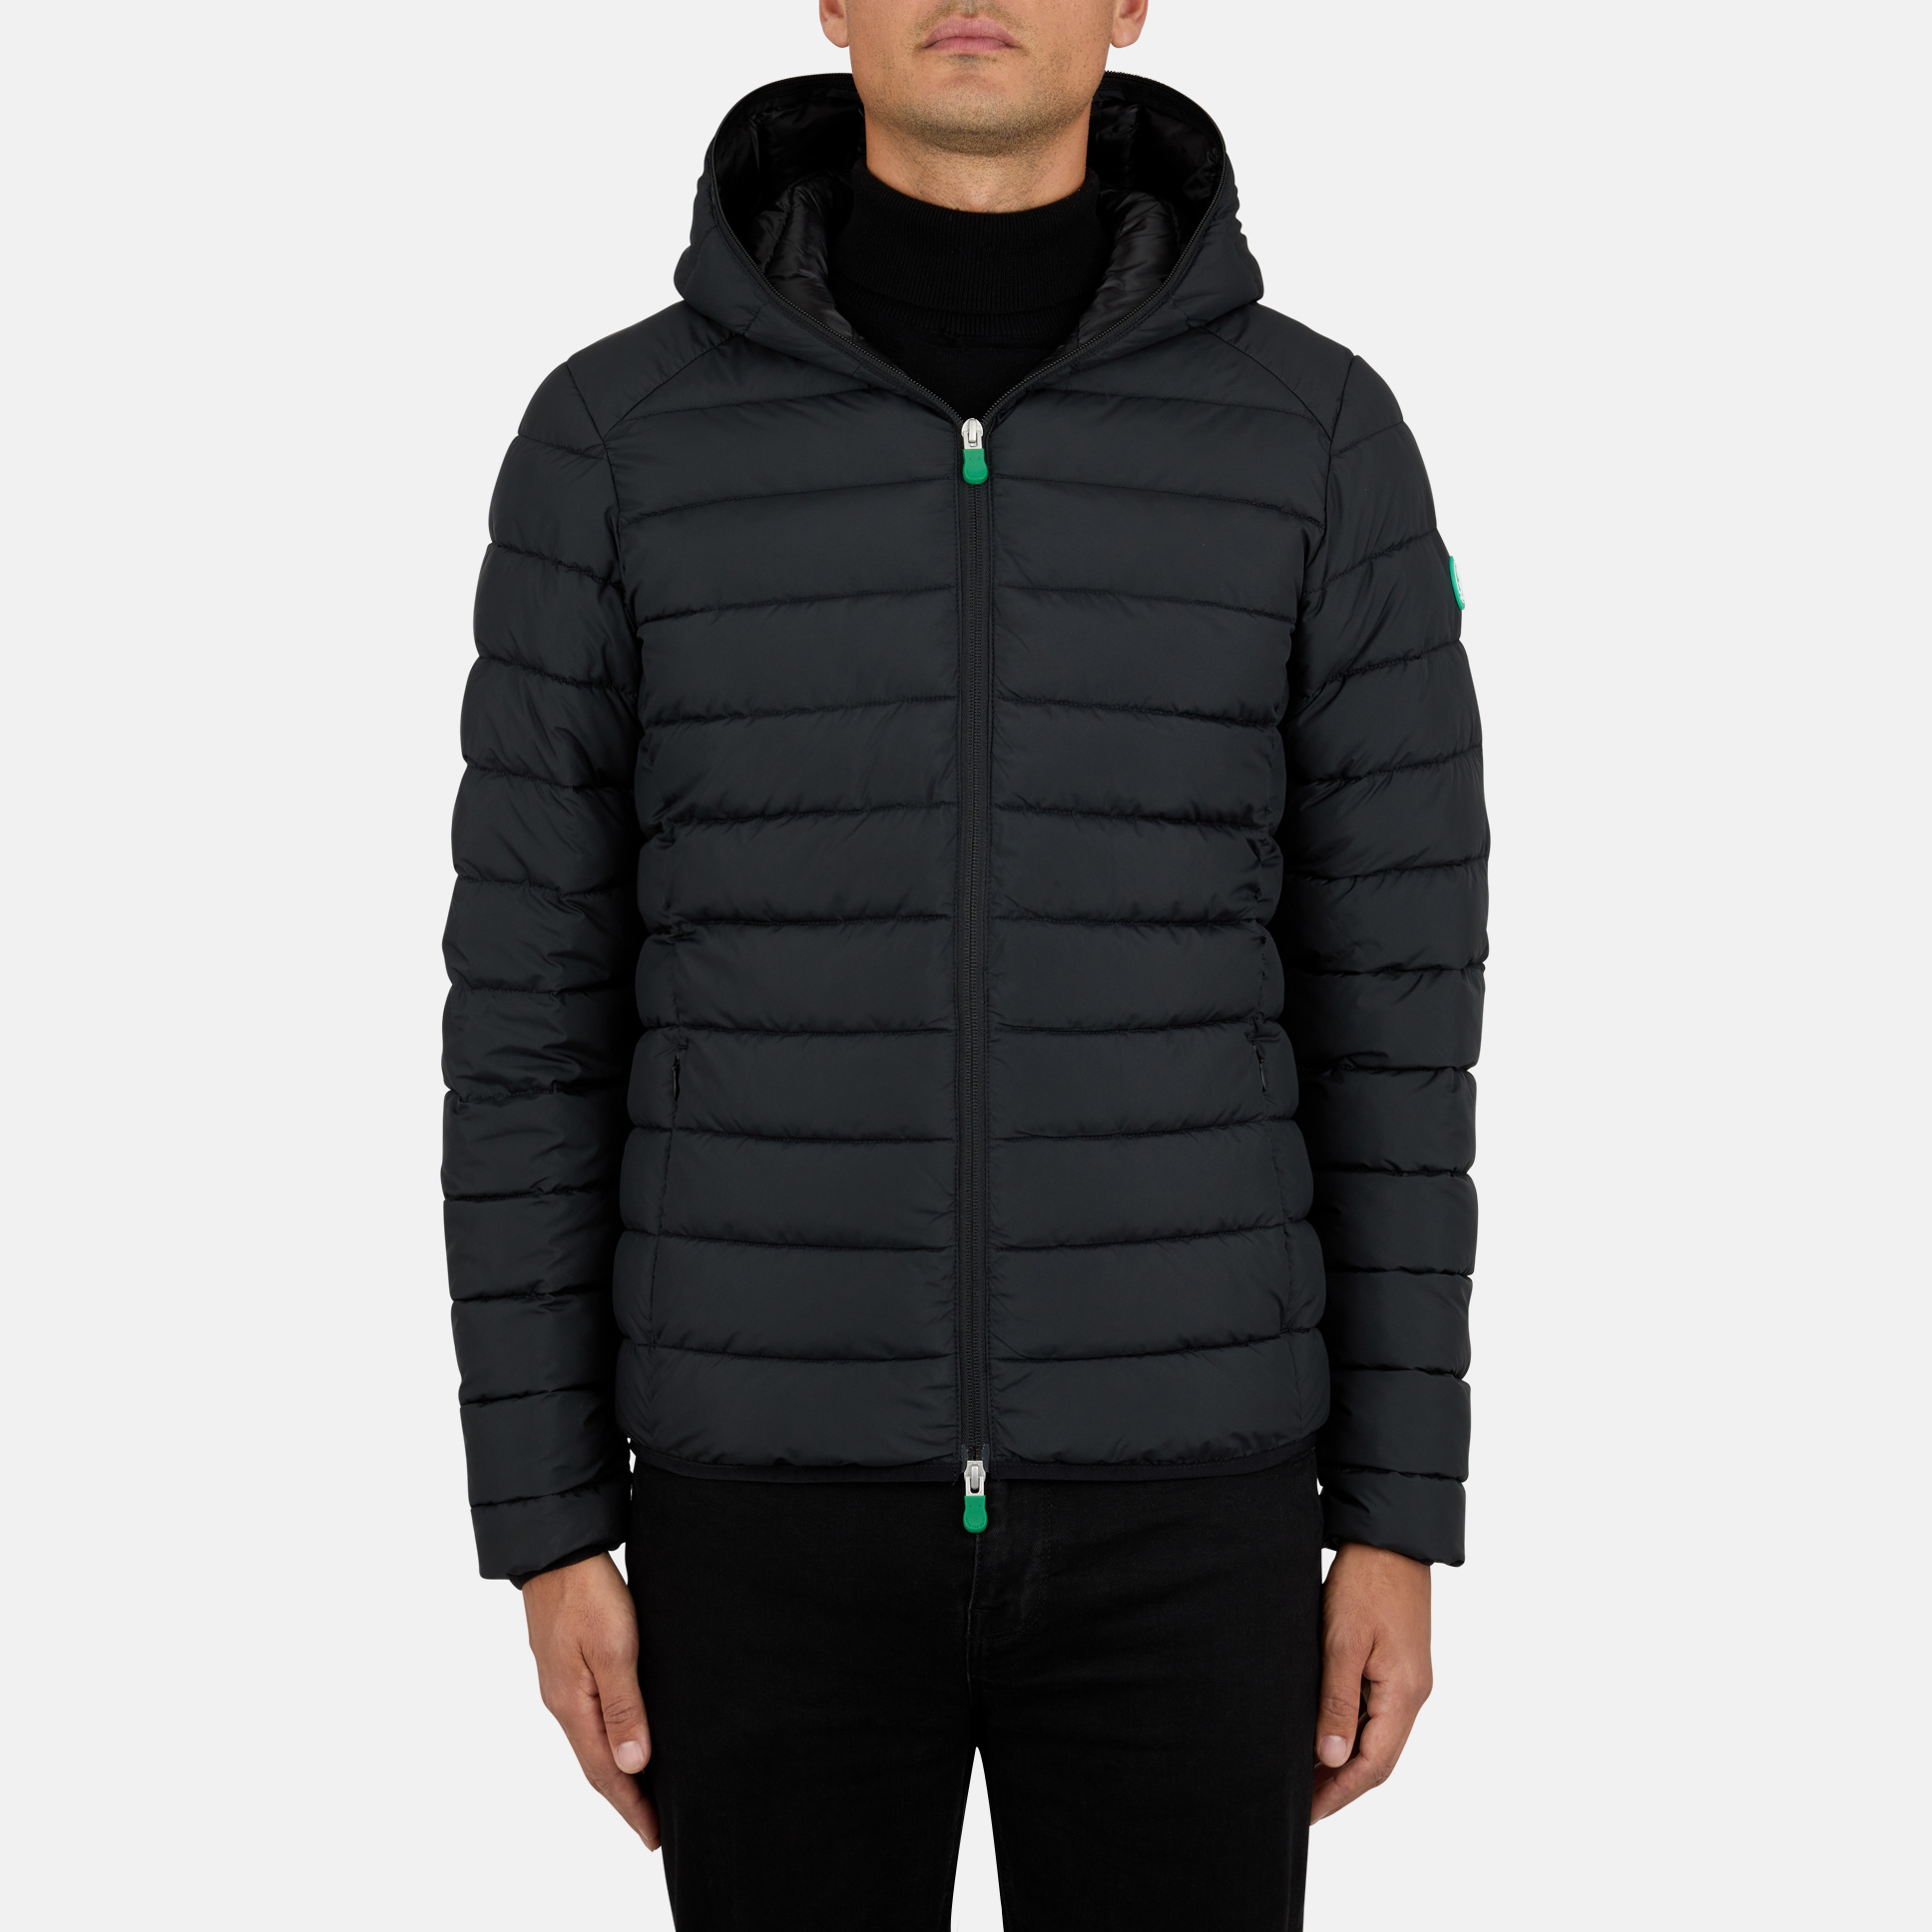 Missend noot Moeras Men's Ernest Jacket in Black by Save The Duck - Herbivore Clothing Co. -  The Herbivore Clothing Company